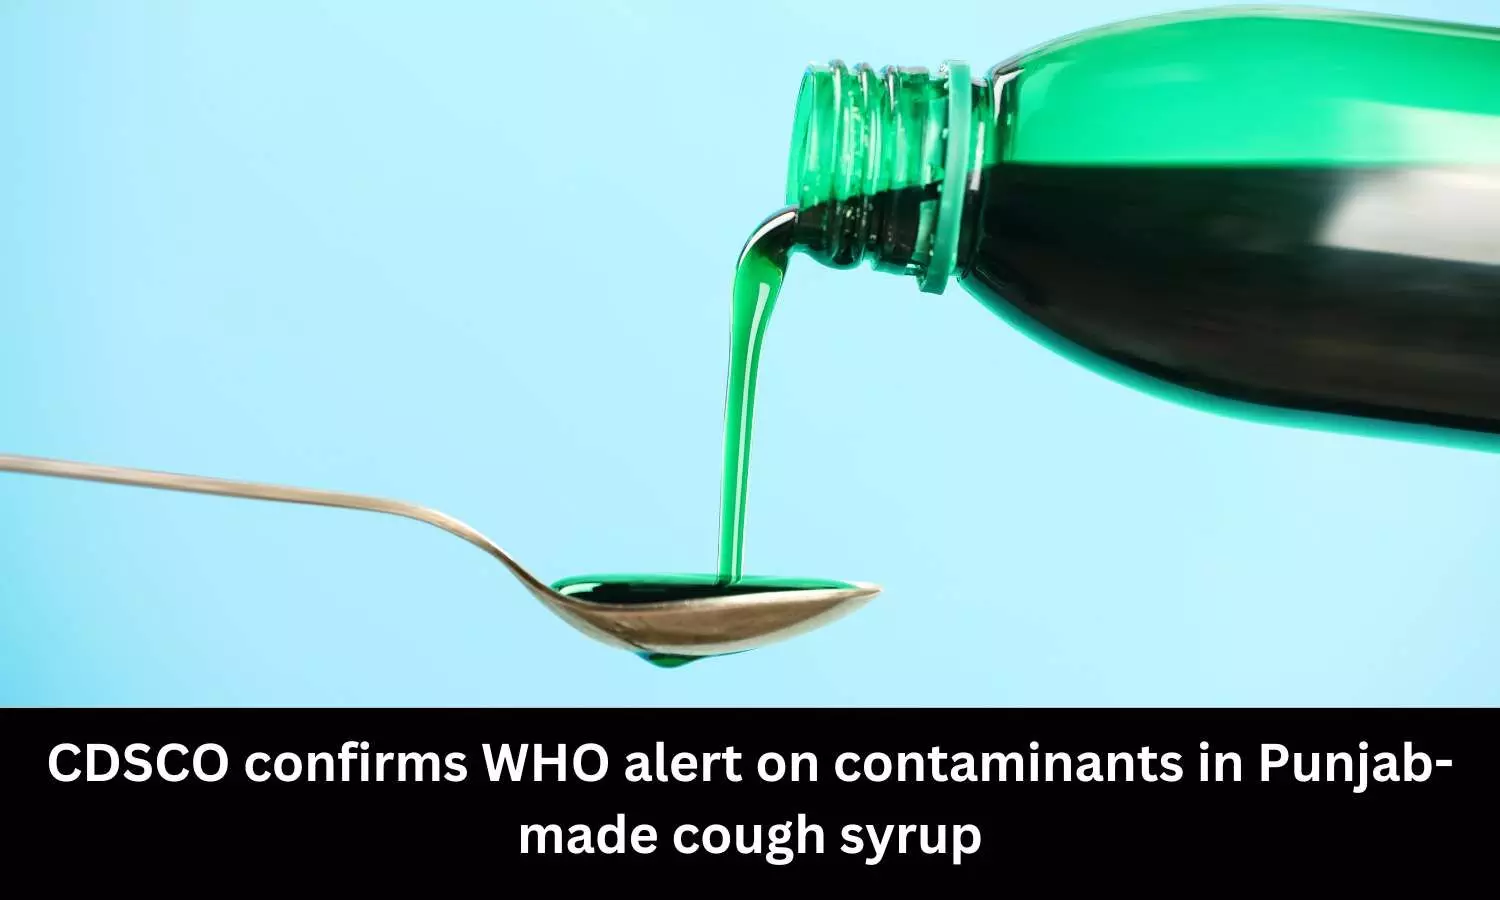 CDSCO confirms WHO alert on contaminants in Punjab-made cough syrup